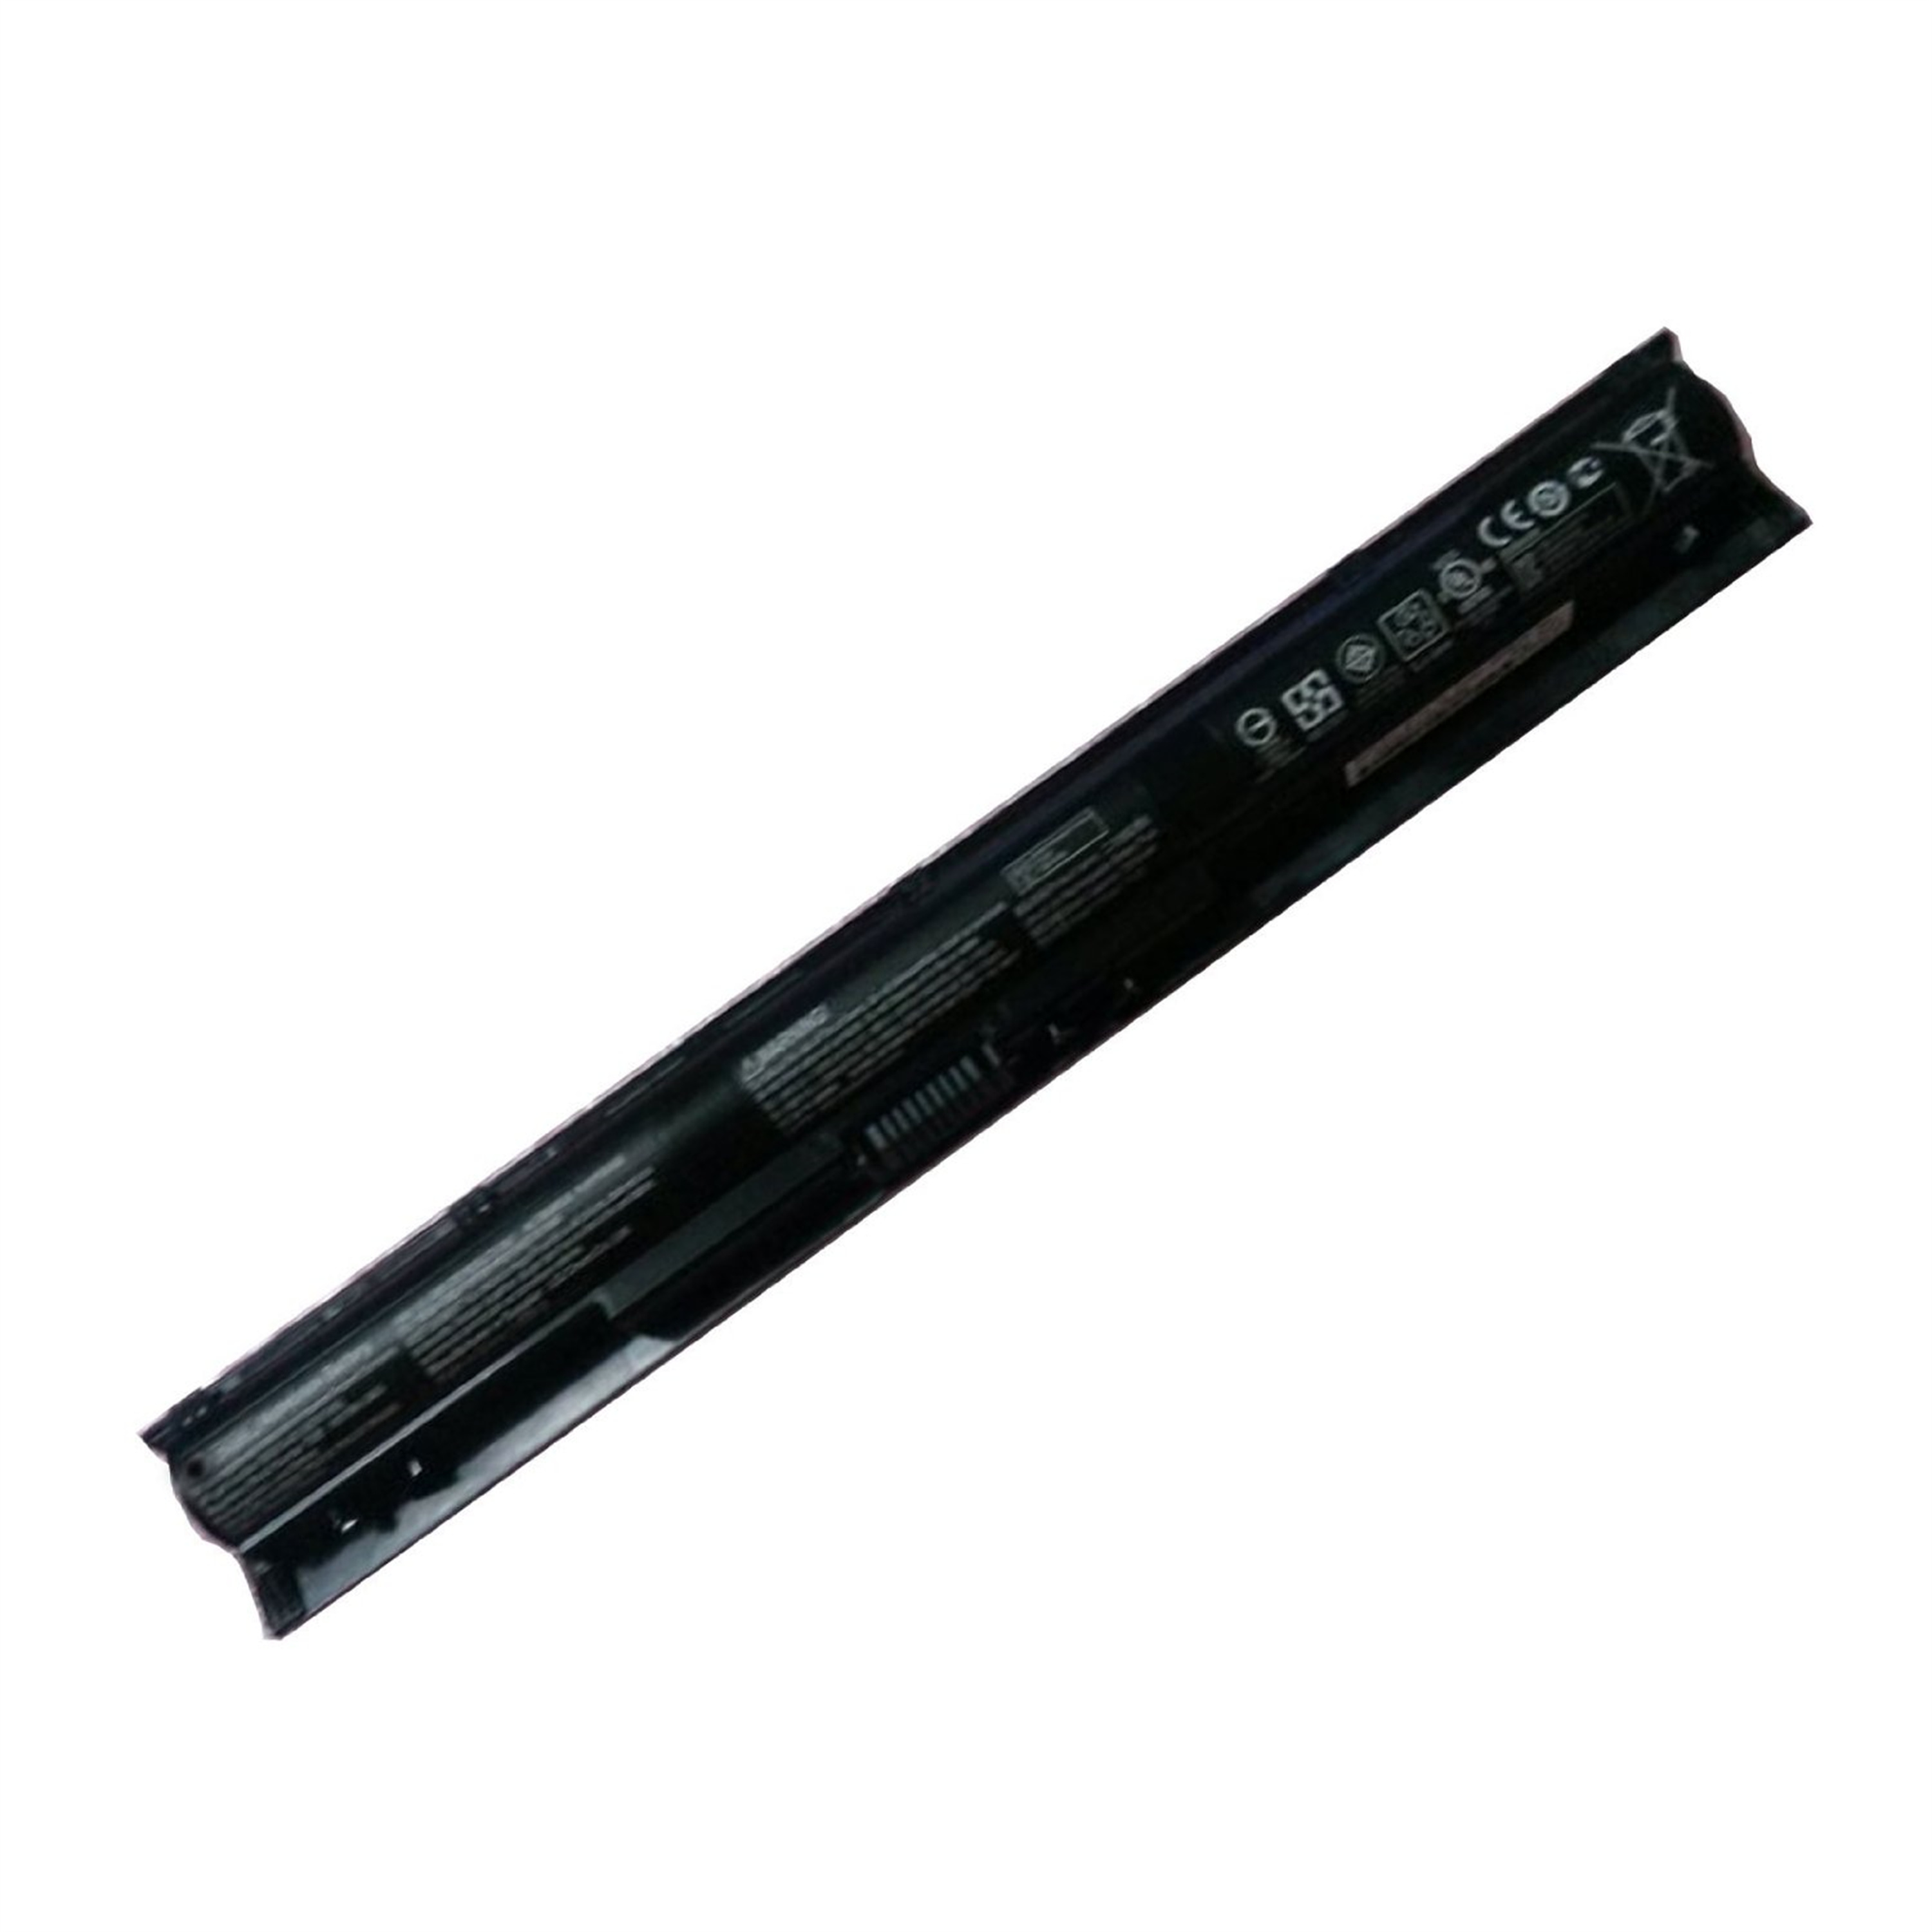 KI04 rechargeable lithium ion Notebook battery Laptop battery for HP Pavilion 14-ab000 15-ab000 17-g000 series 800049-001 HSTNN-LB6S/DB6T 14.8V 33WH